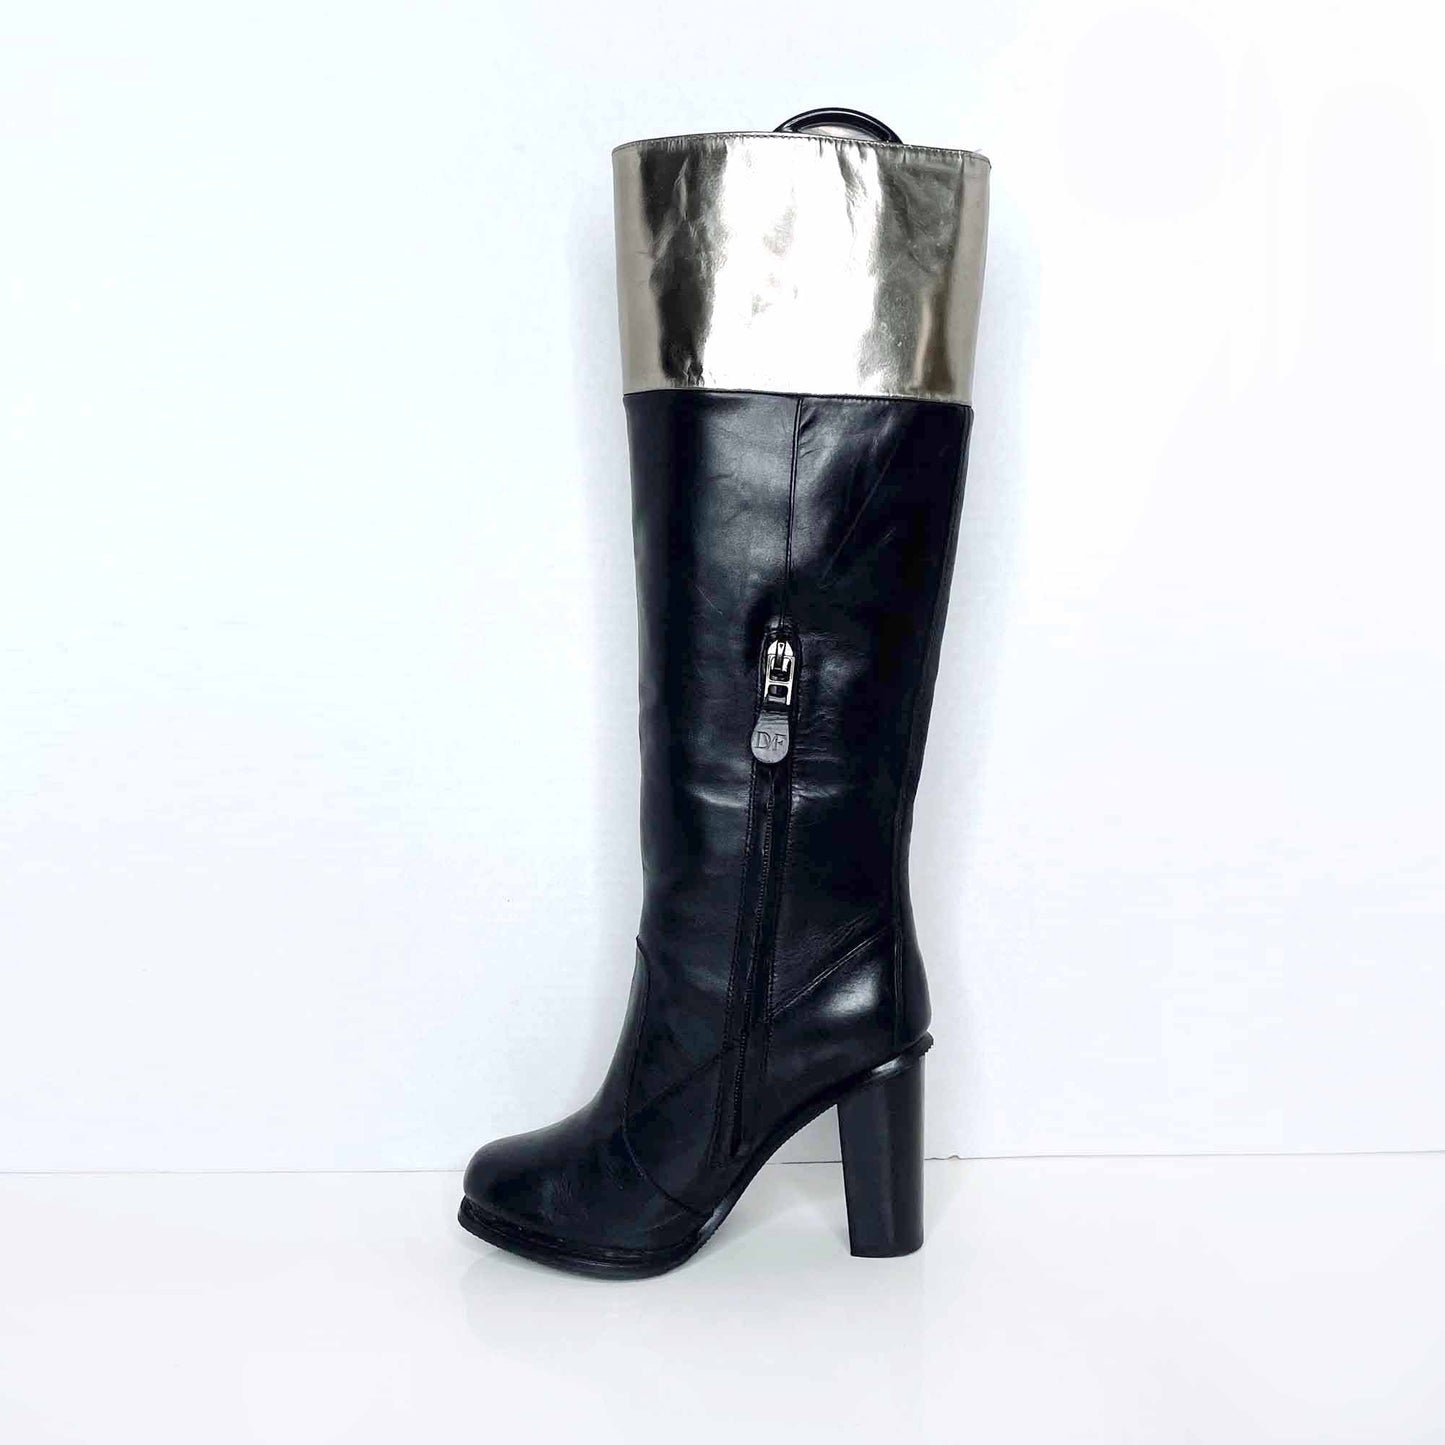 diane von furstenberg shelly tall leather heeled boots with gold trim - size 6